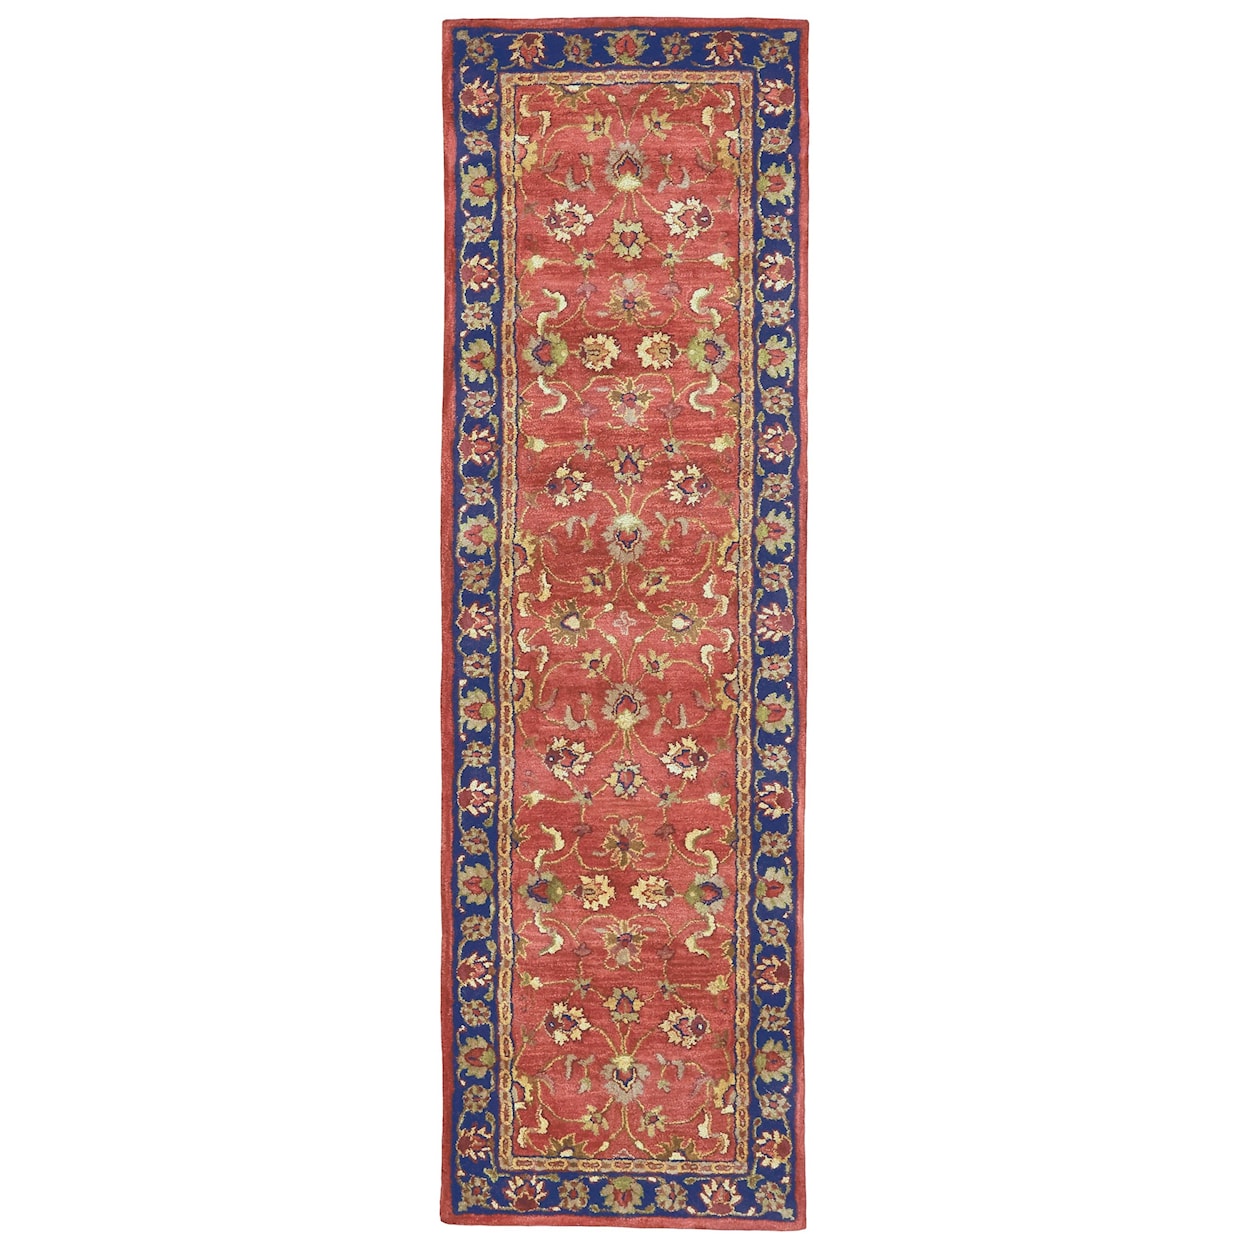 Feizy Rugs Alexandra Red/Navy 9'-3" x 13' Area Rug